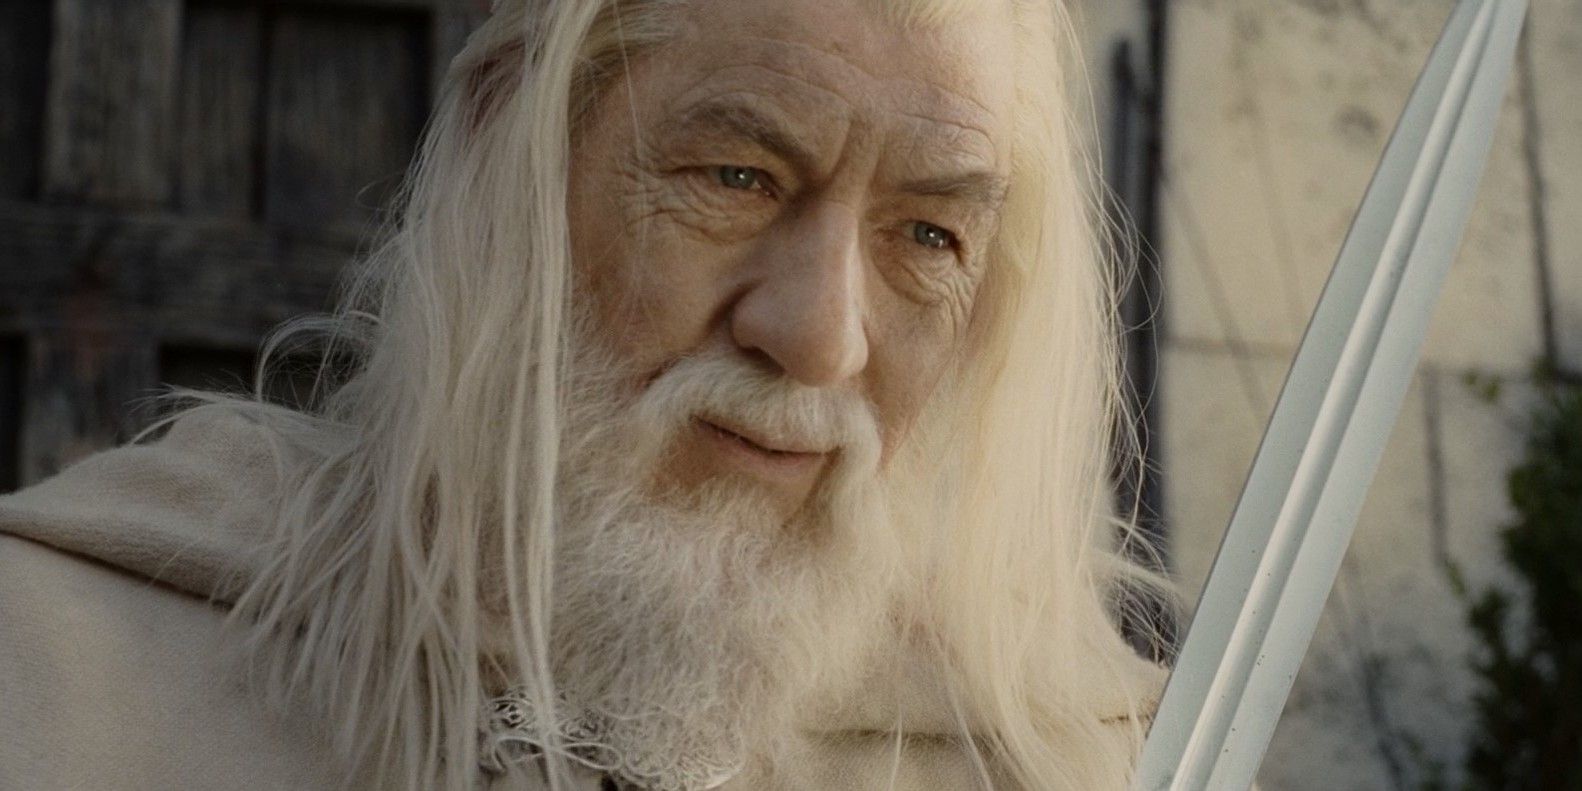 Gandalf talking to Pippin in The Lord of the Rings The Return of the King